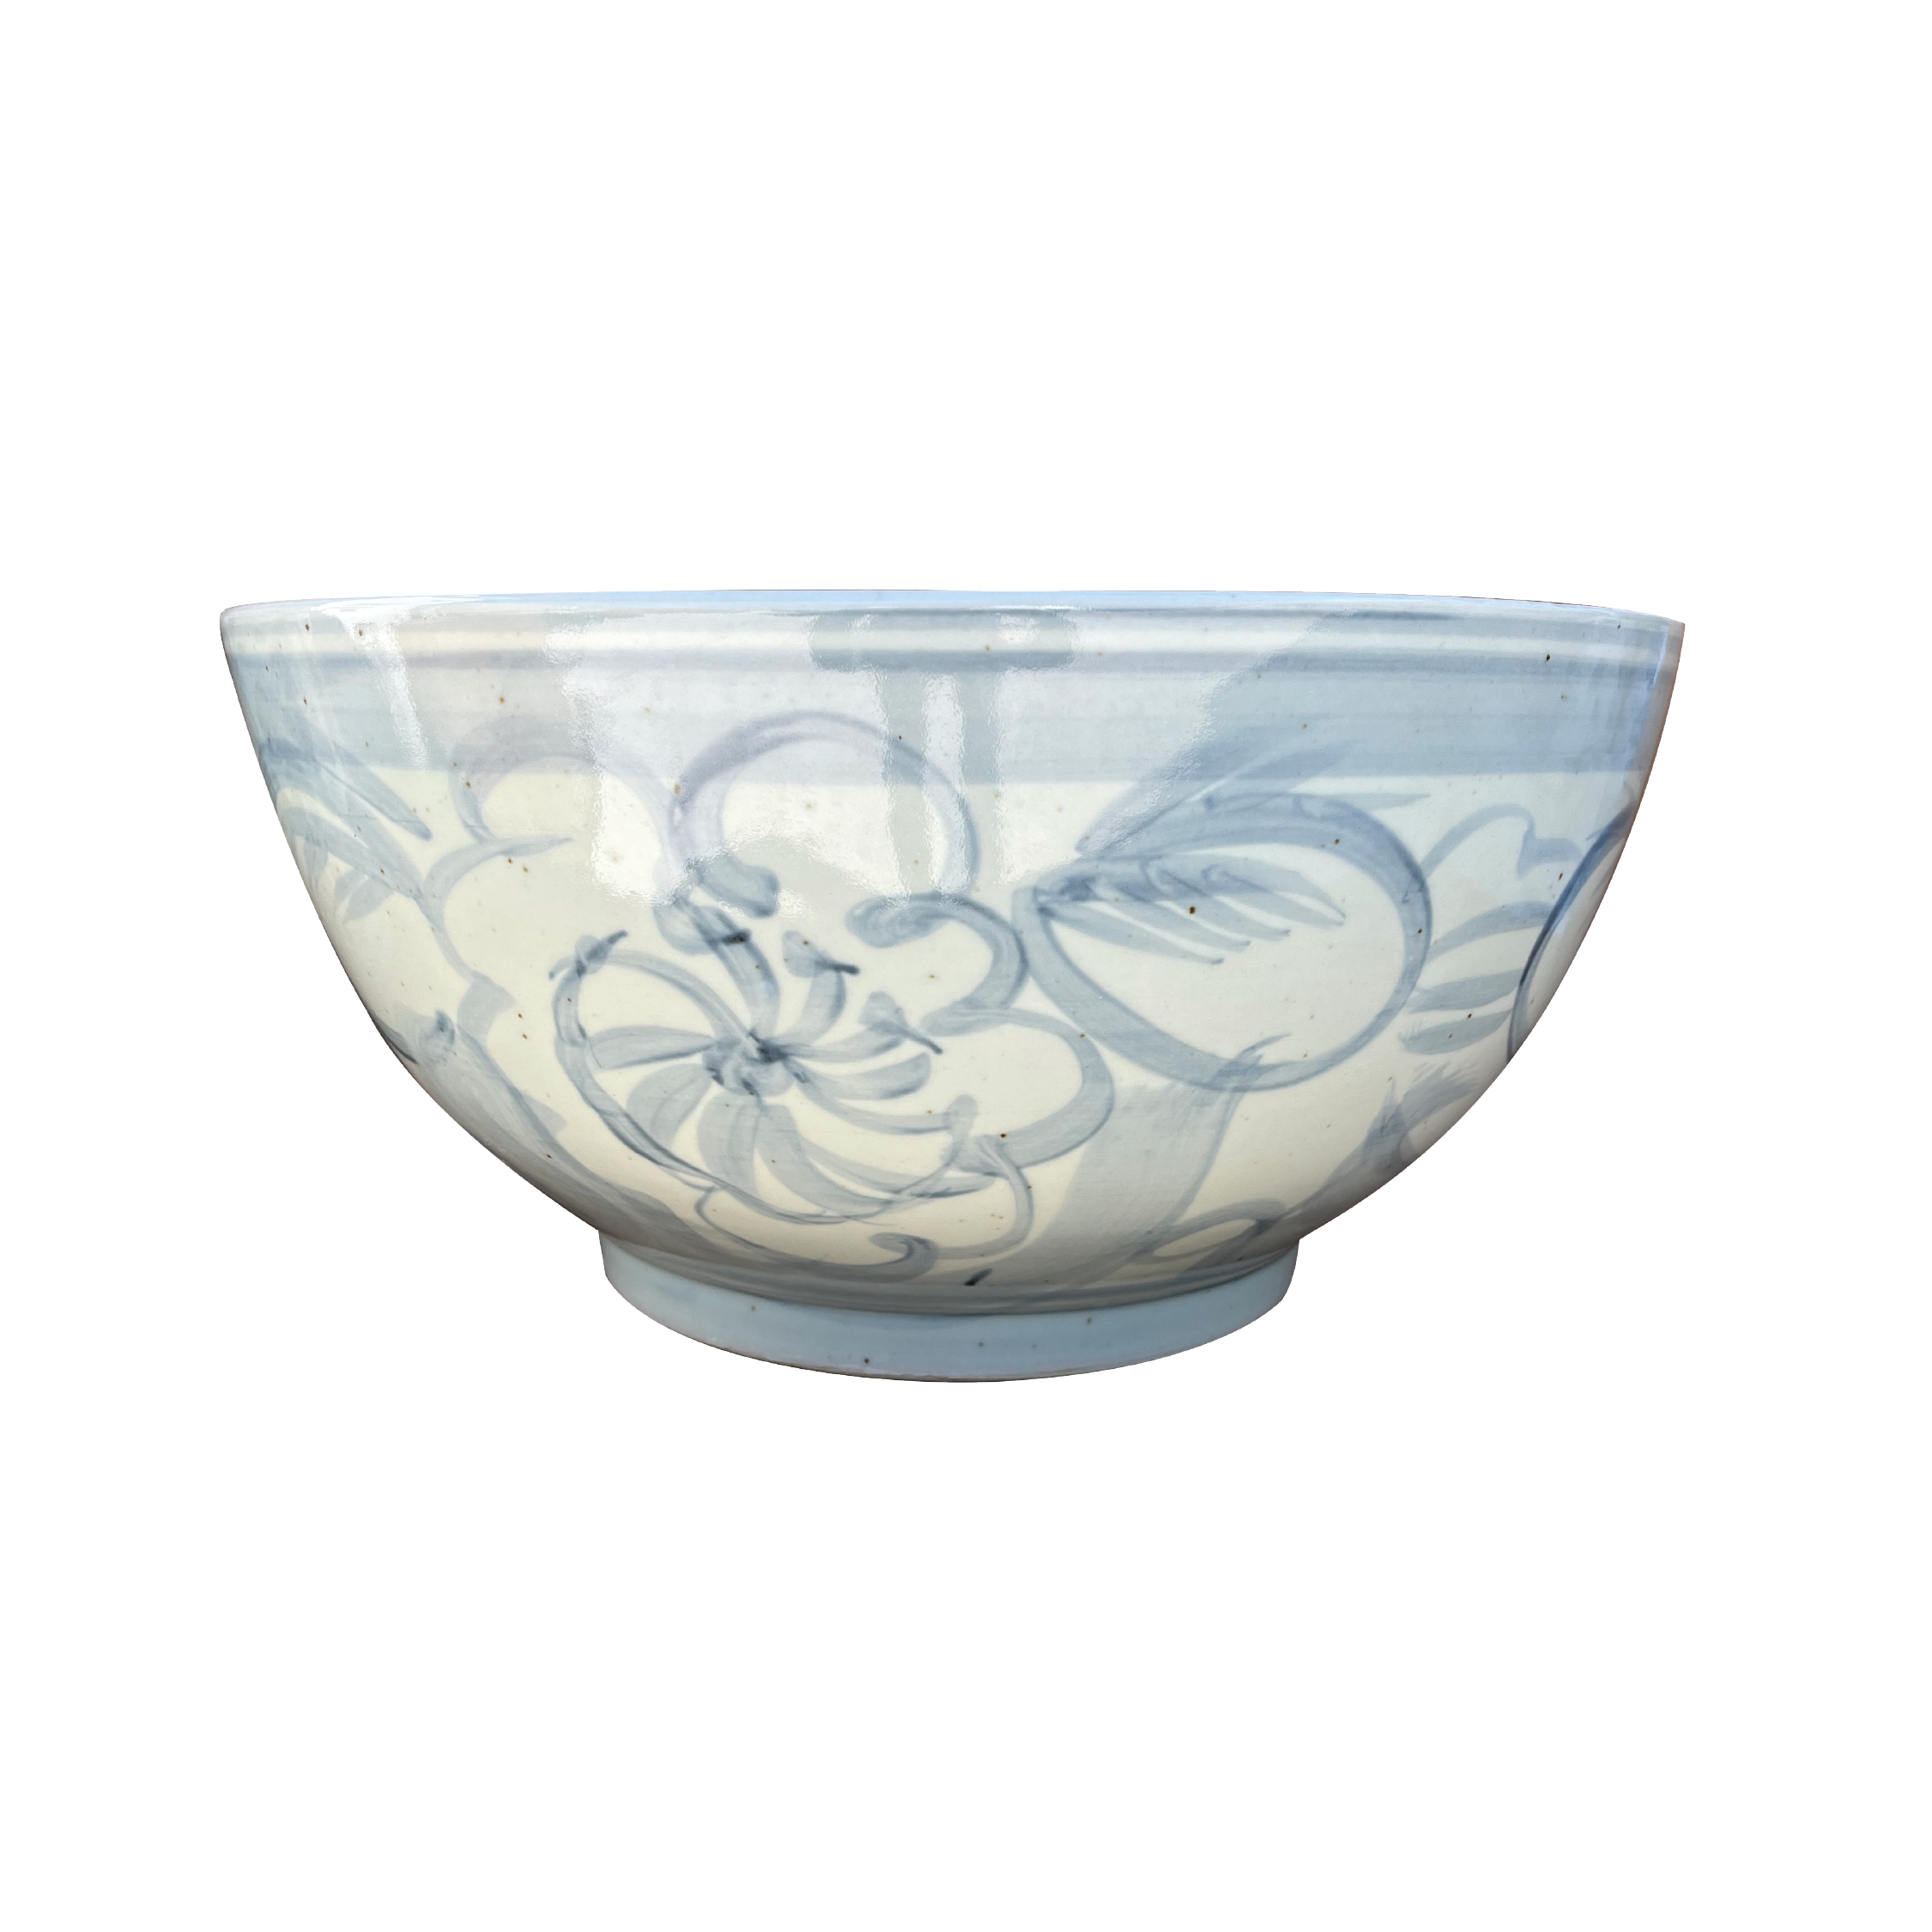 Large Blue and White Bowl with Lotus Motif